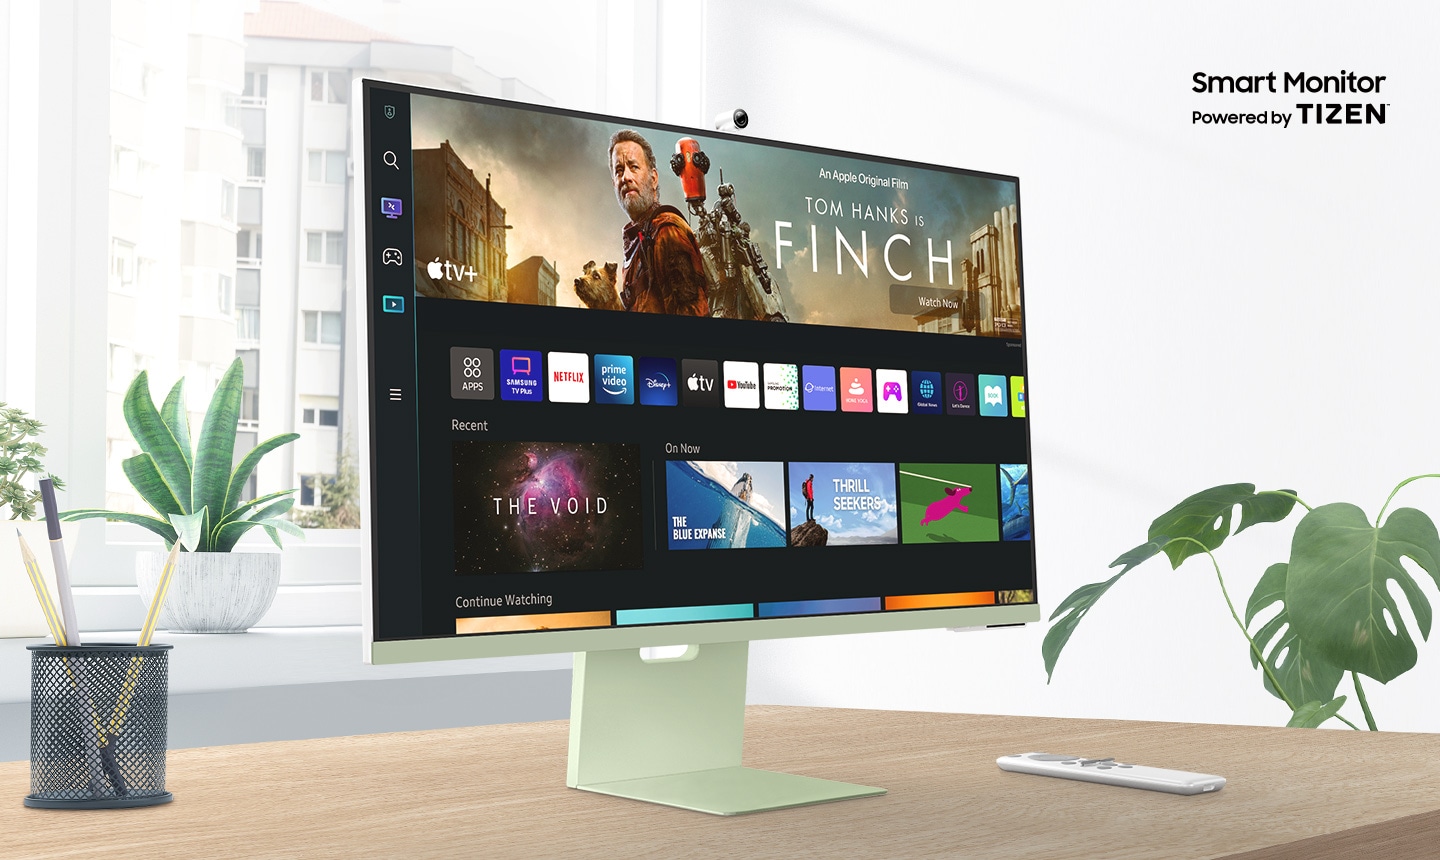 Samsung M8 32 inch smart monitor sits on top of a wooden desk in front of a window surrounded by plants. Above the monitor, texts read Smart Monitor Powered by Tizen. The screen shows an Apple TV app with a variety of content. A remote rests next to the monitor.